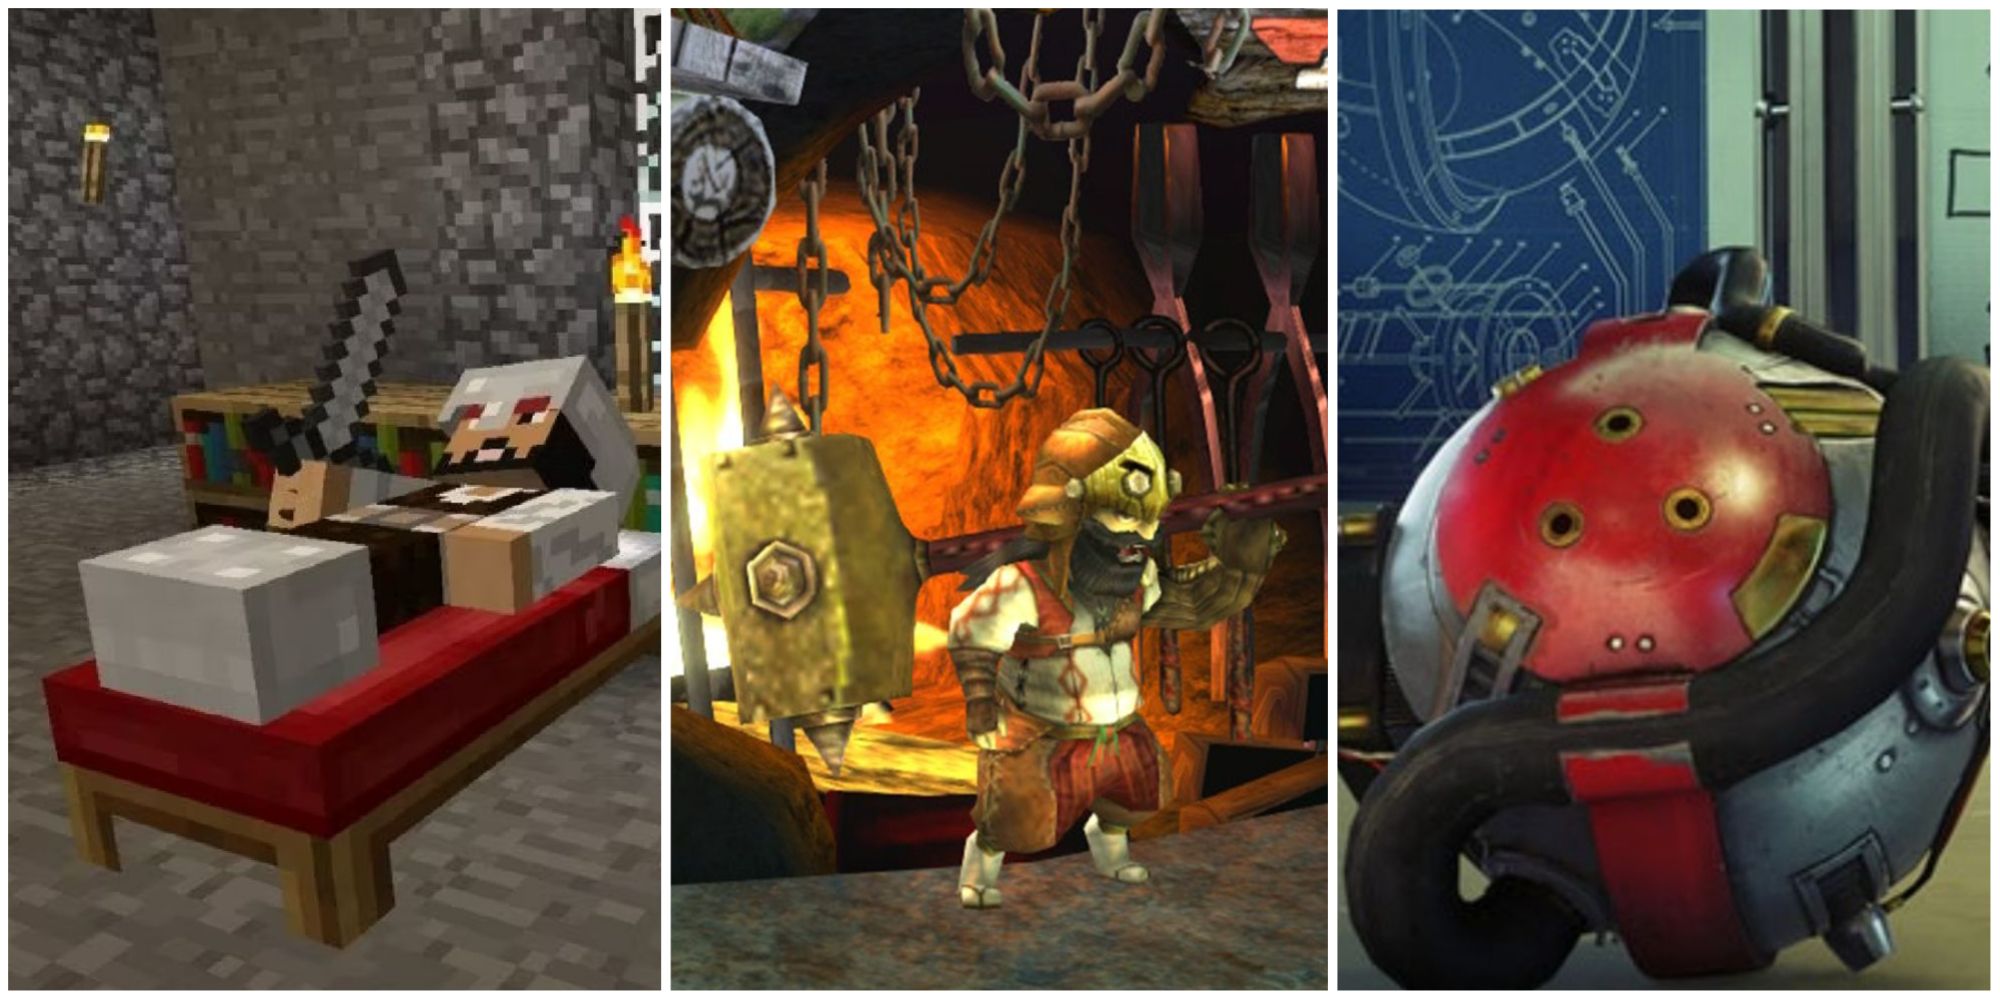 A player in iron armor sleeping in bed, a felyne from Monster Hunter Generations by a forge, and a recycler charge from Prey, left to right